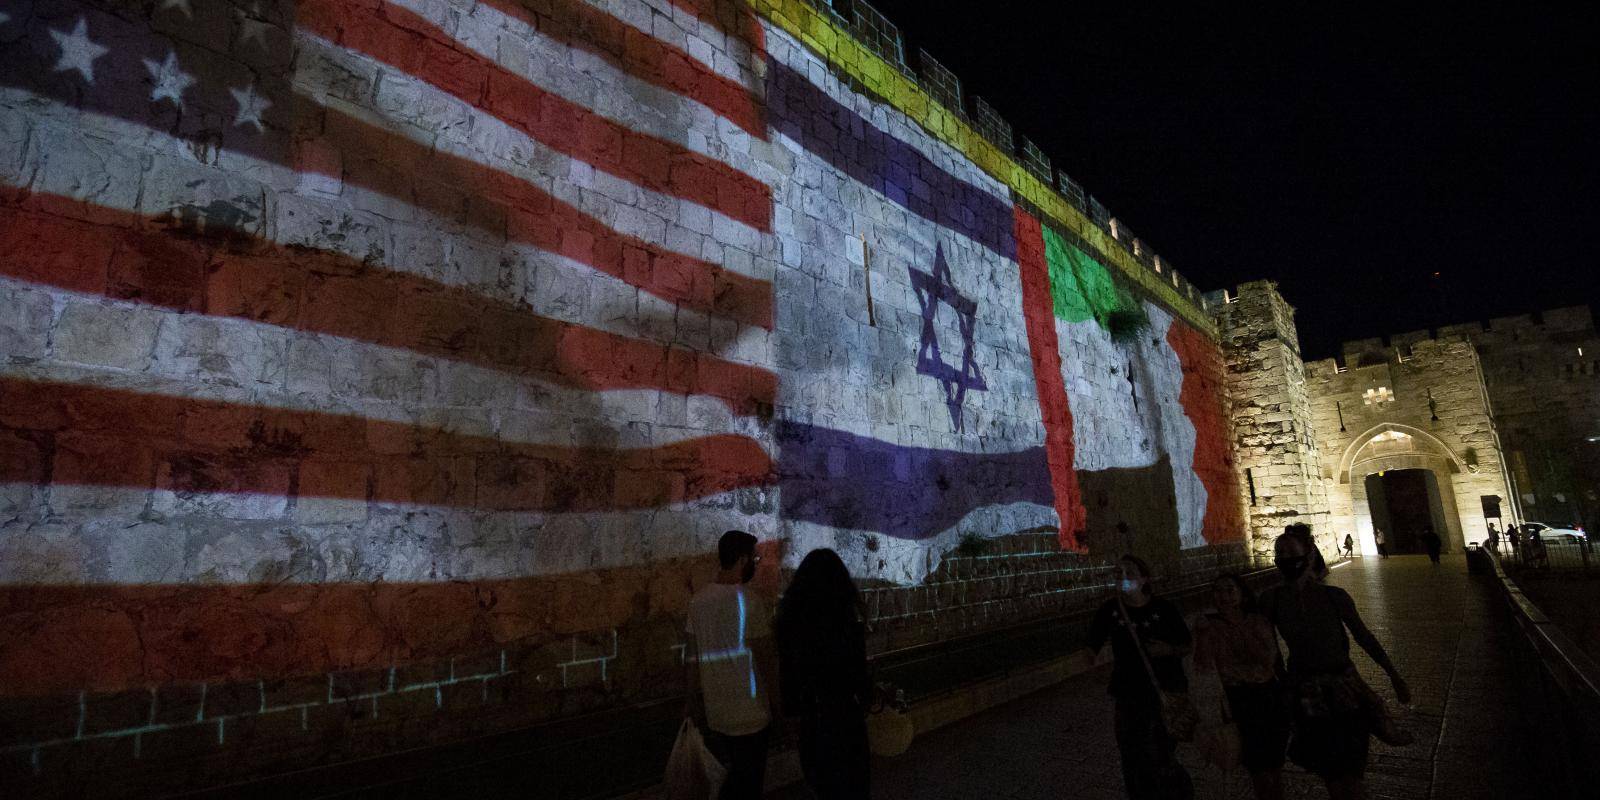 The flags of the US, Israel, the UAE and Bahrain are projected on the walls of Jerusalem's Old City to mark the signing of the Abraham Accords on 15 September 2020.